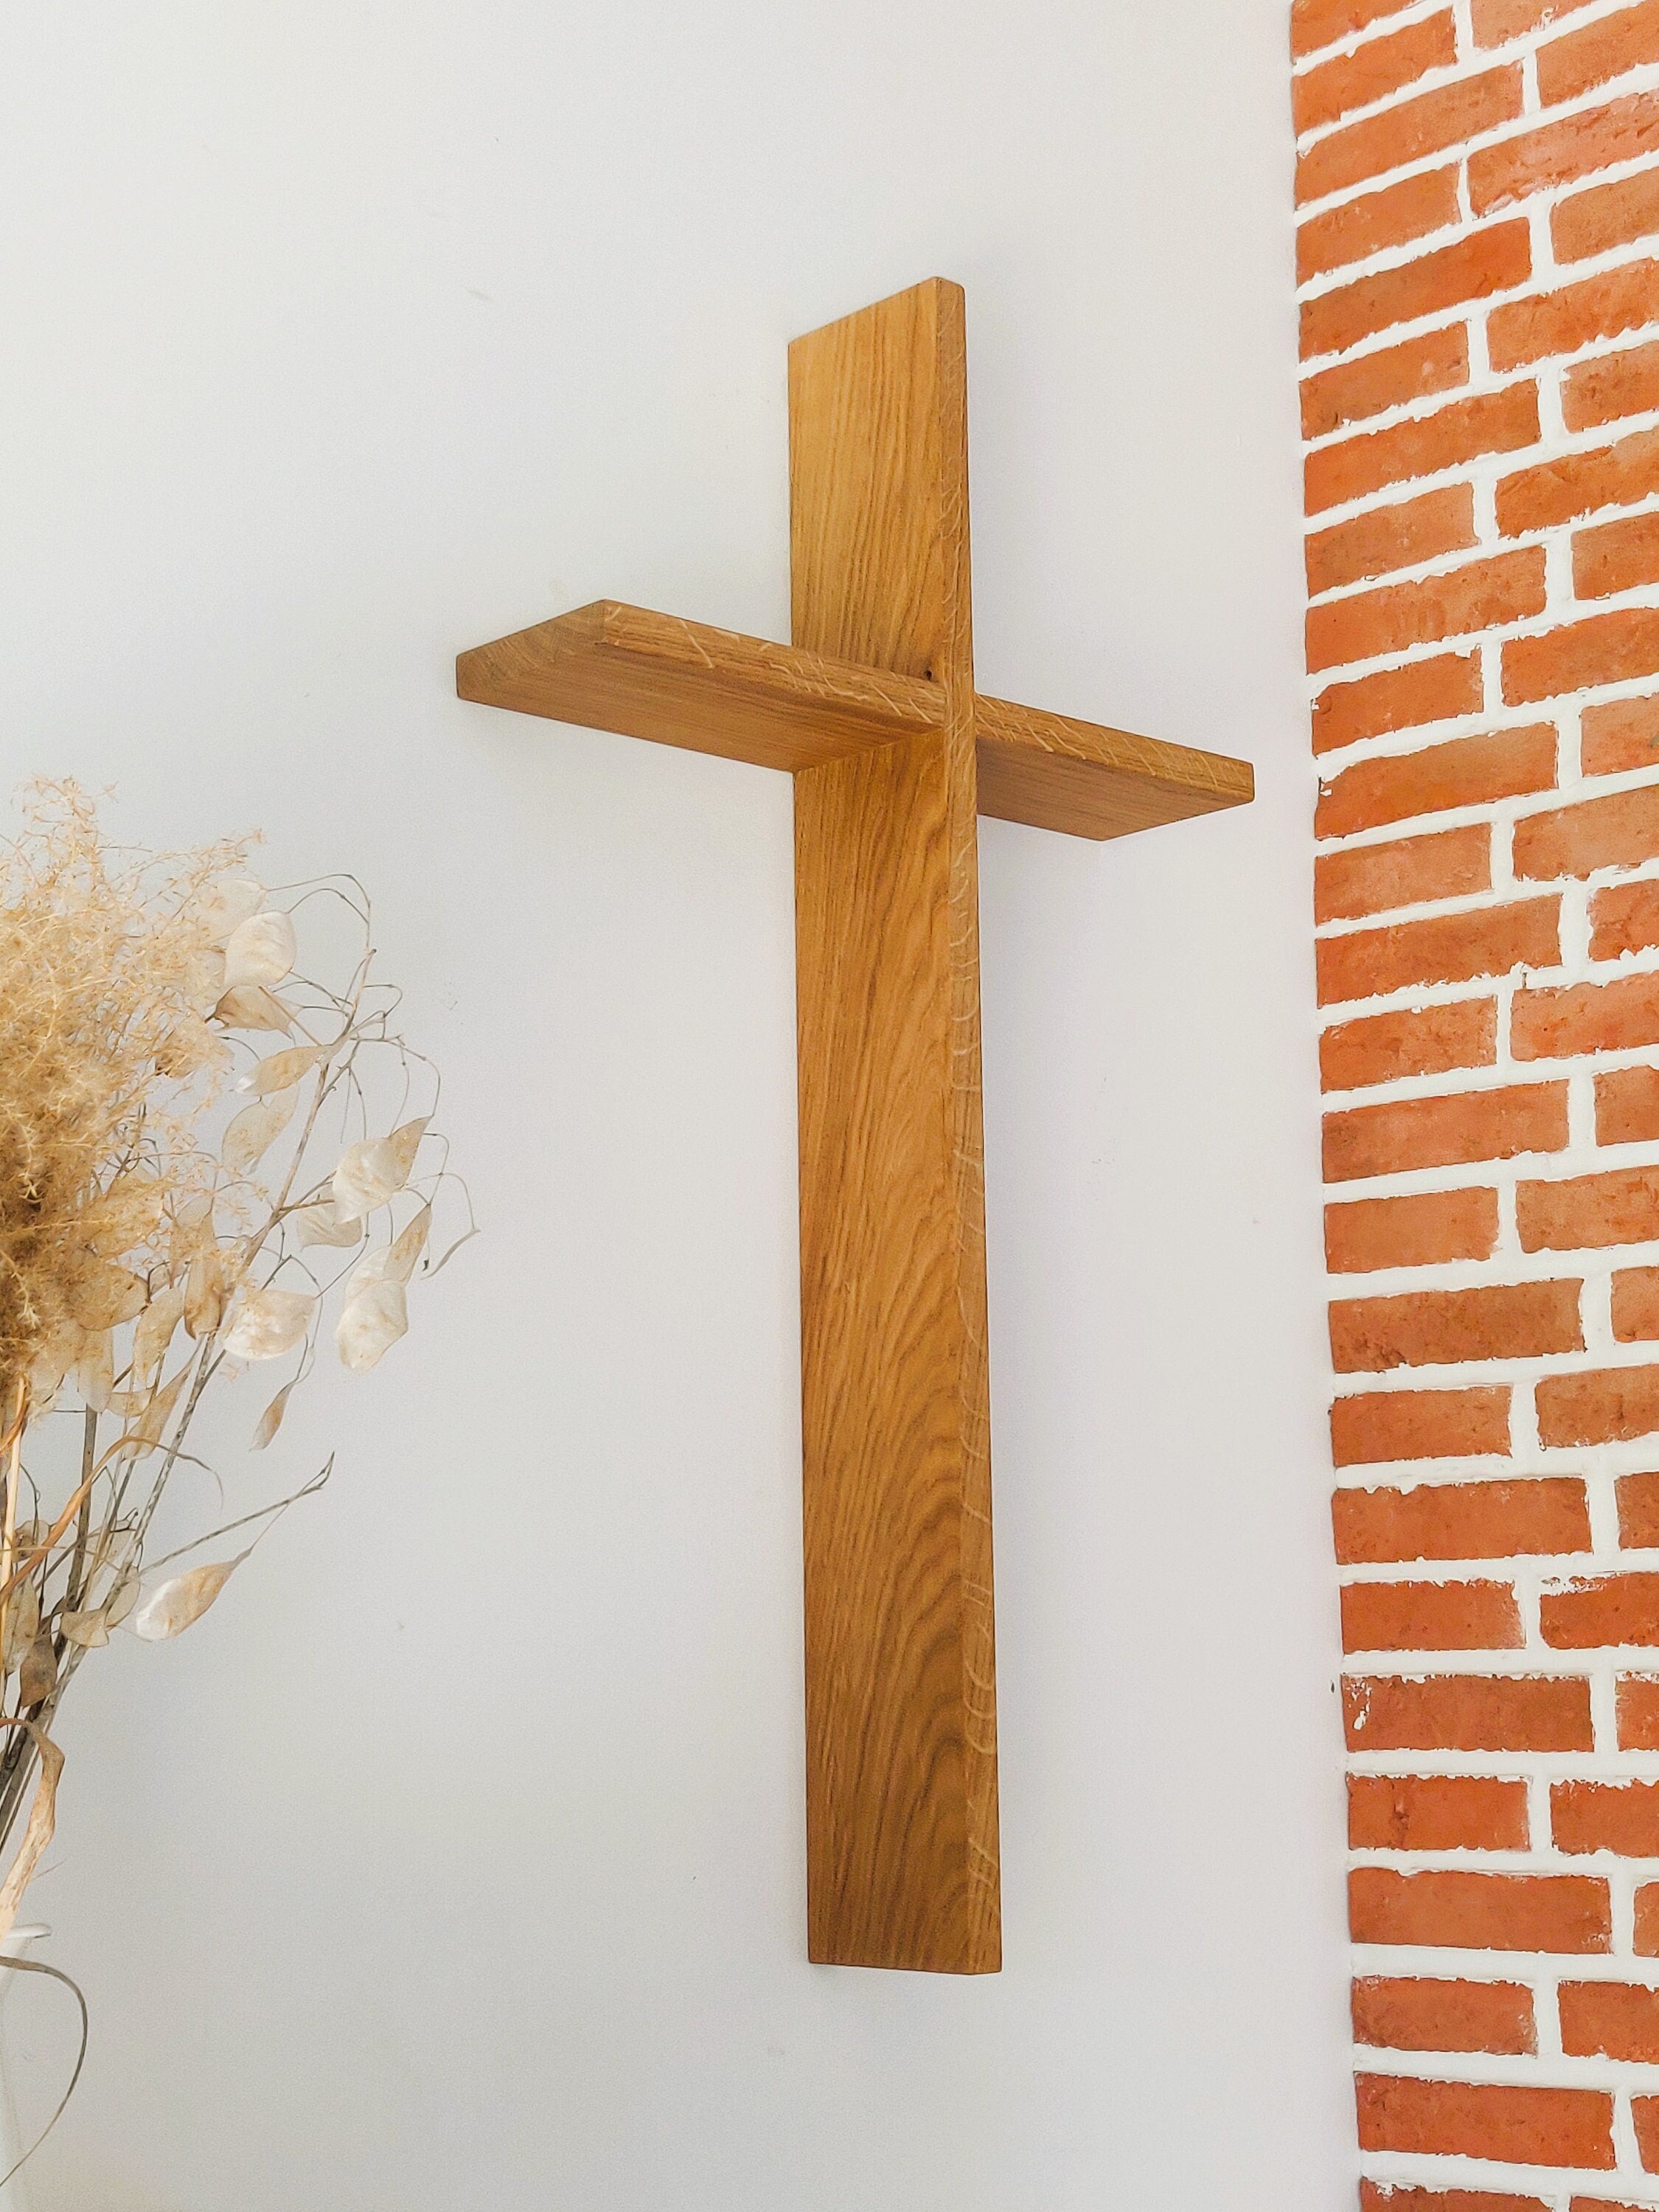 Large 5 Foot 4 Inch Standing Decorative Wooden Cross